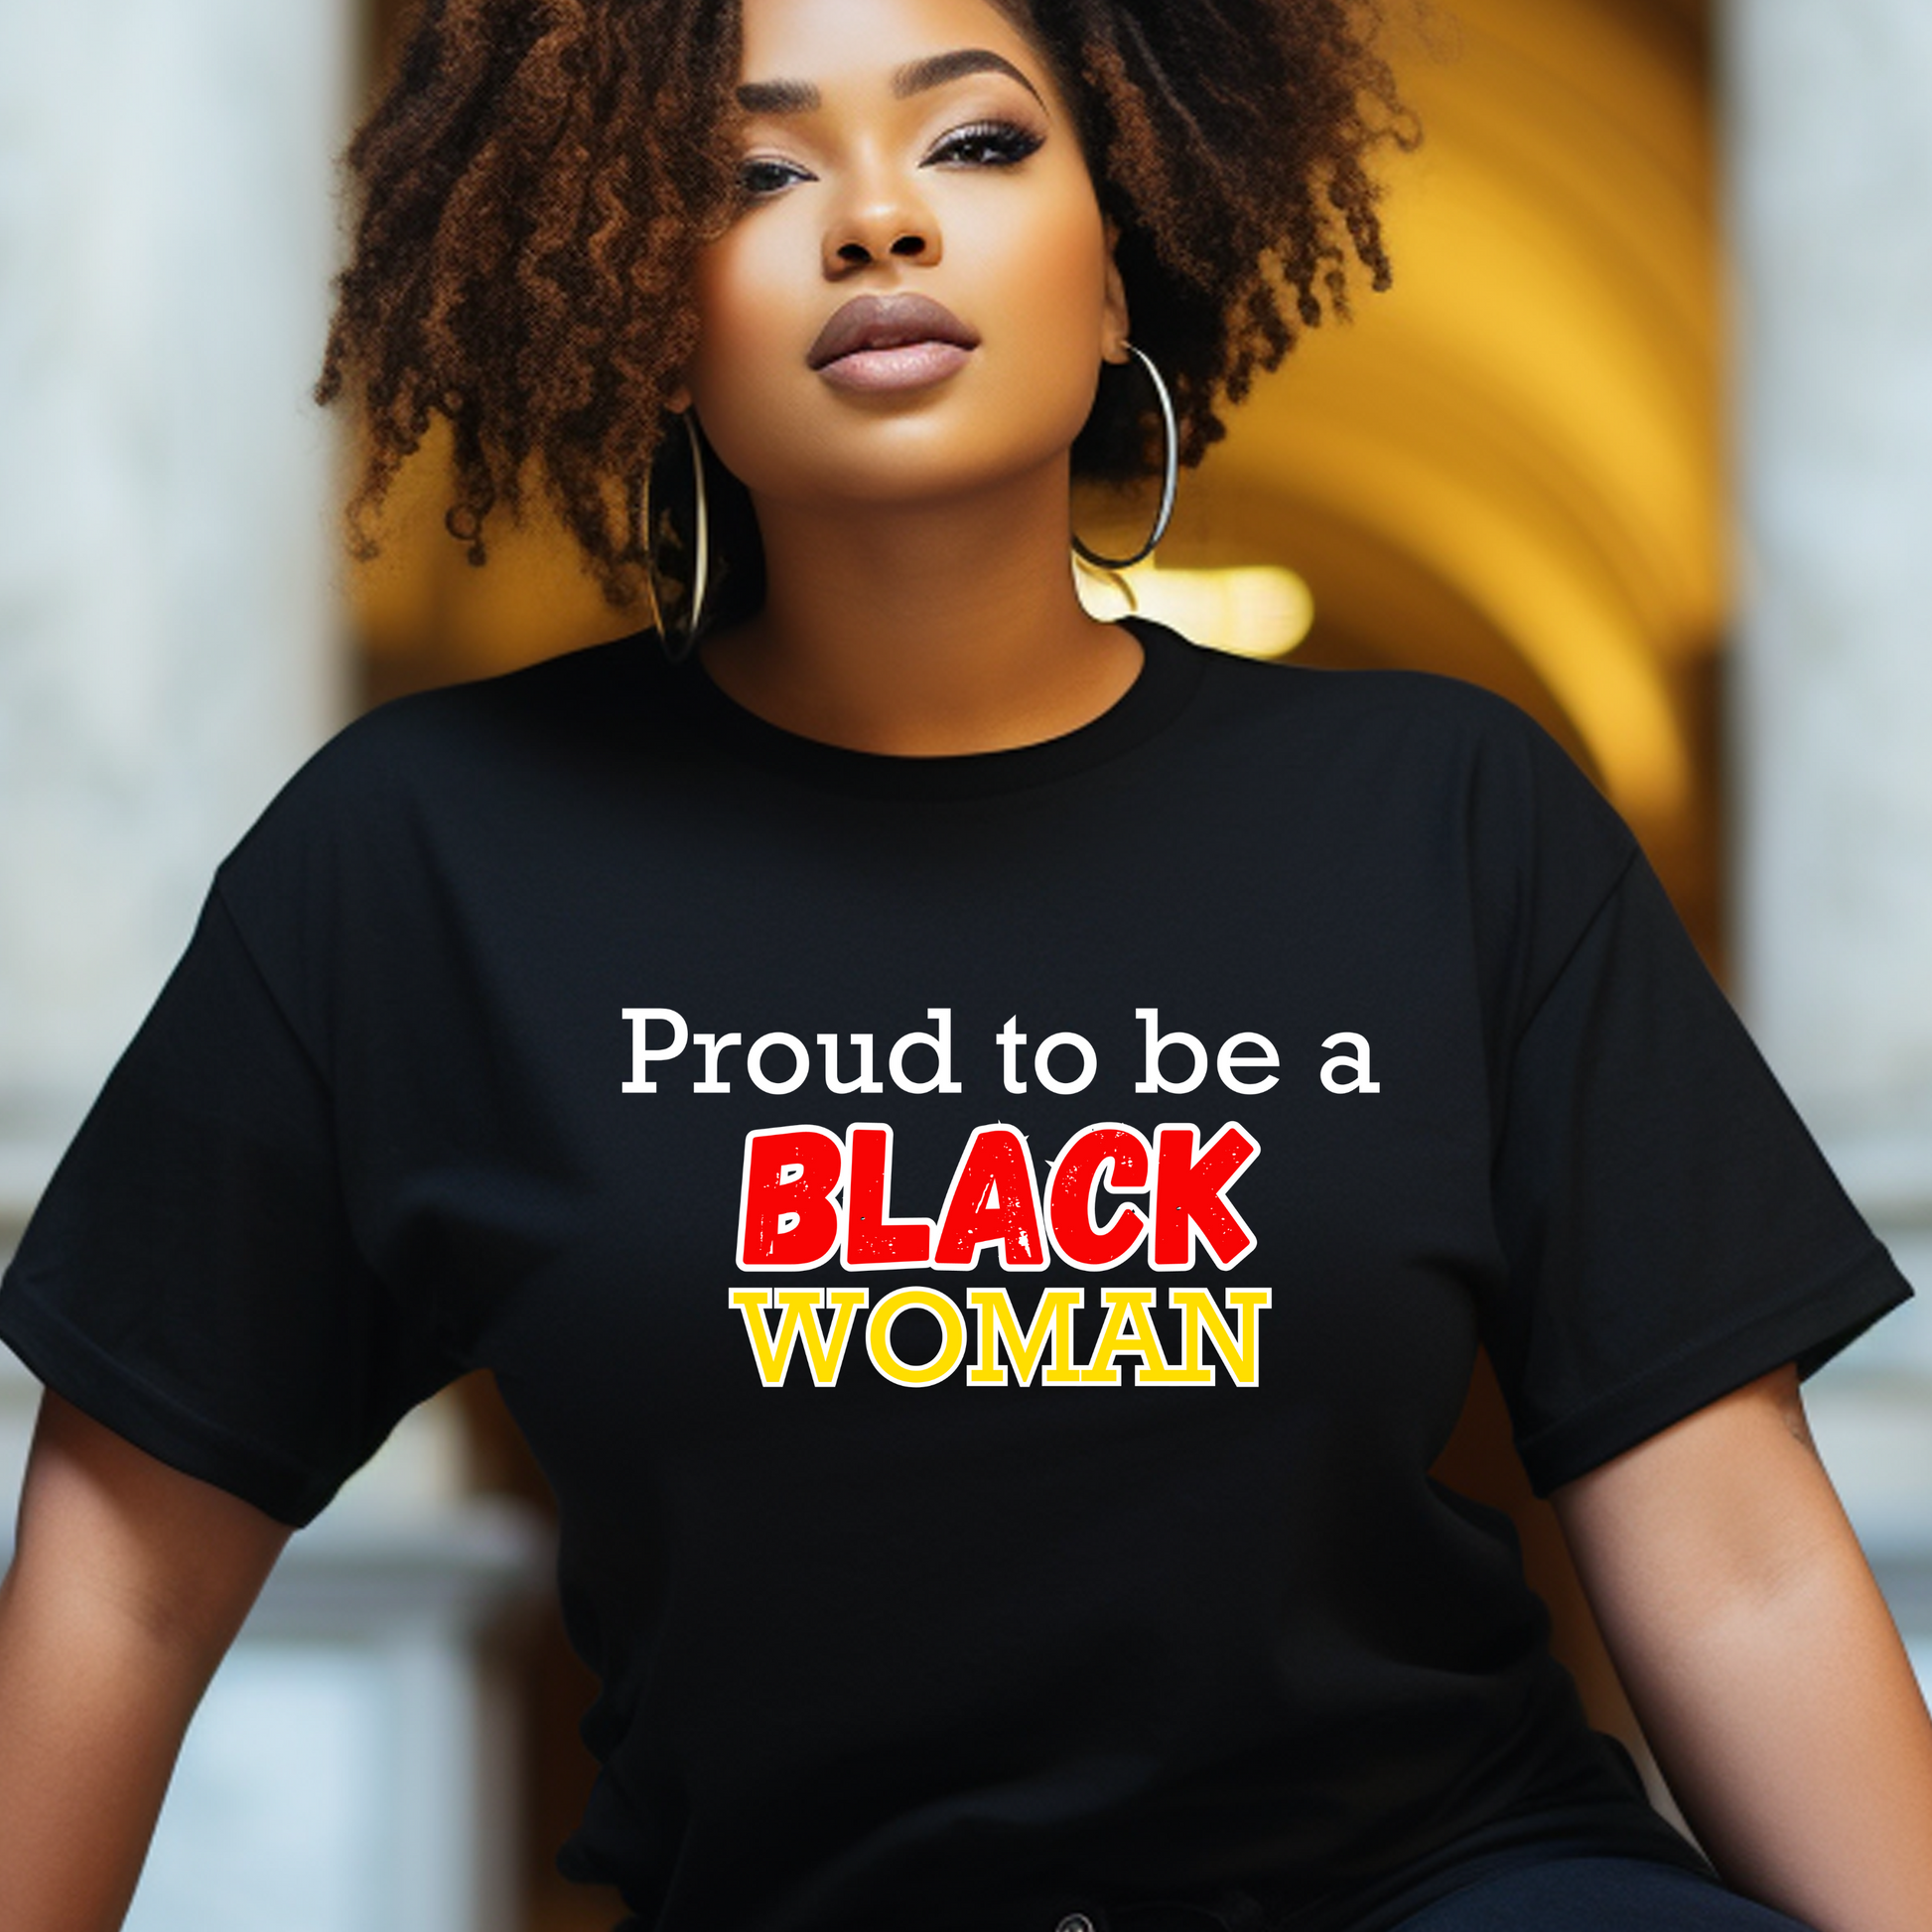 "Proud to be a Black Christian Woman" t-shirt: A stylish black tee with empowering text, celebrating Black History and faith. Perfect for making a bold statement. 🖤✝️ #BlackChristianWoman #FaithFashion #BlackHistoryFashion